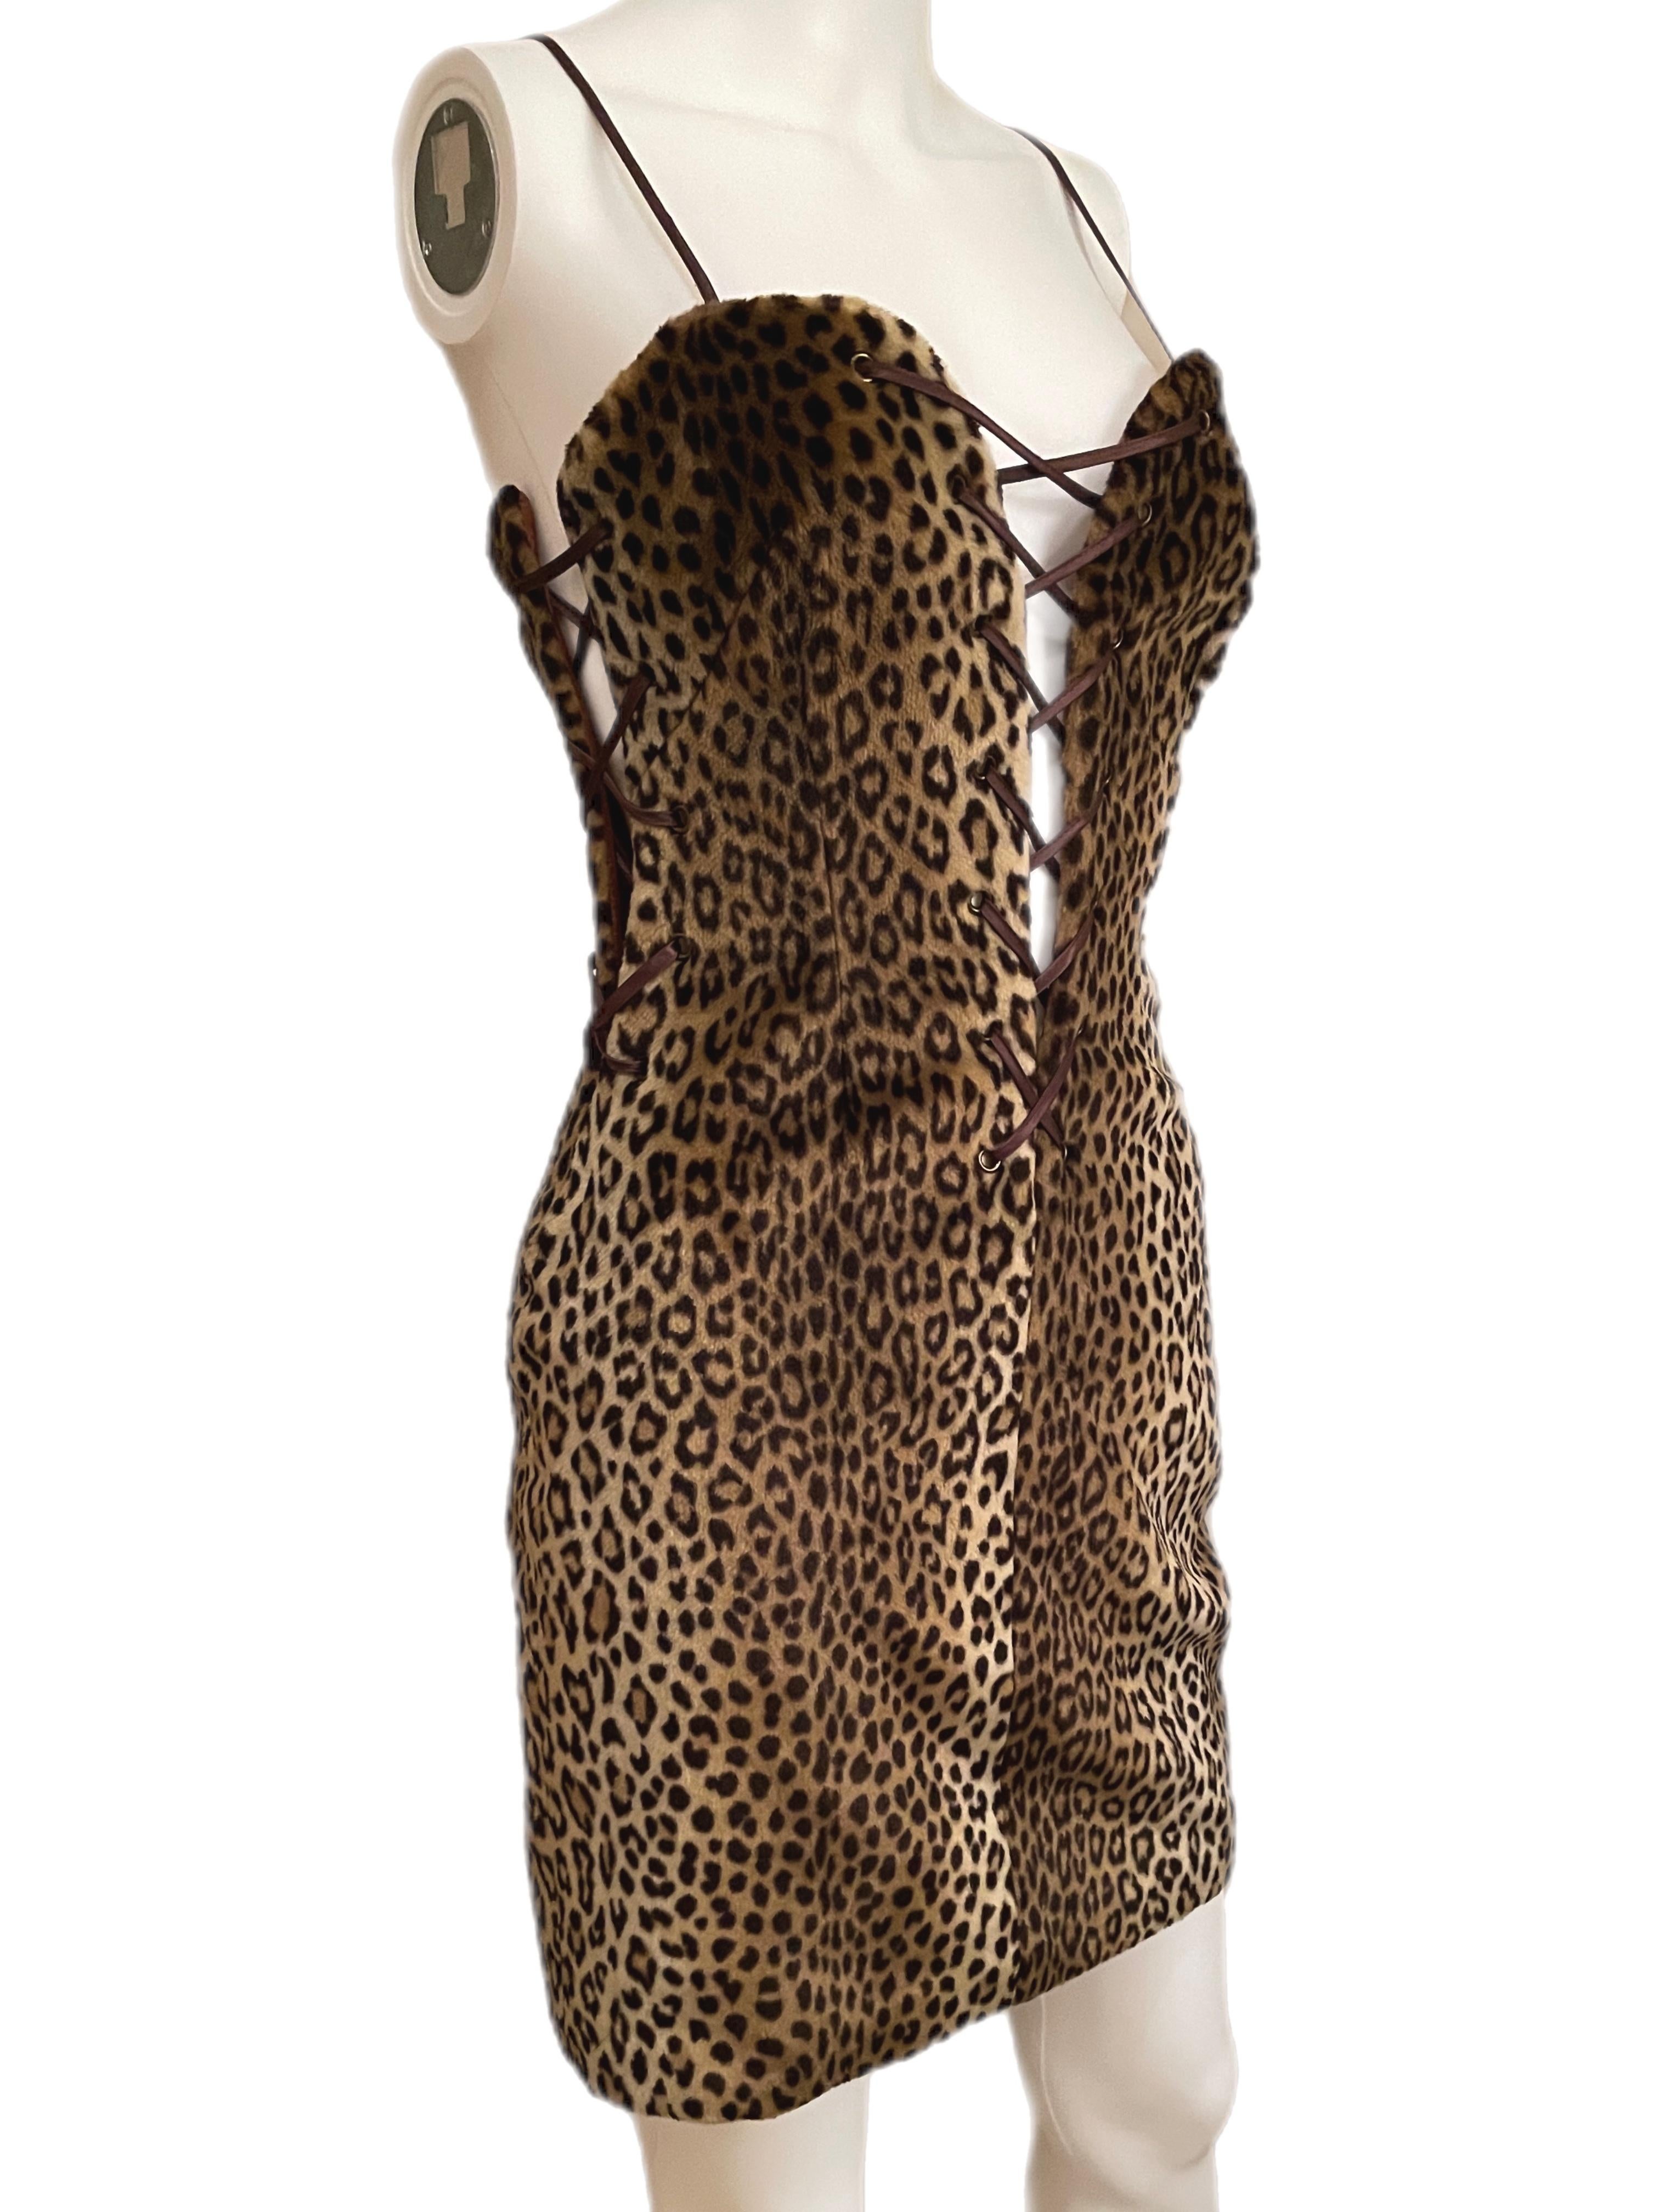 Yves Saint Laurent Variation leopard animal print mini dress with sweetheart plunge neck. Perfect condition, no flaws. Fits XS-M. The laces on the sides and in the front are totally adjustable. YSL. NO RETURNS FINAL SALE